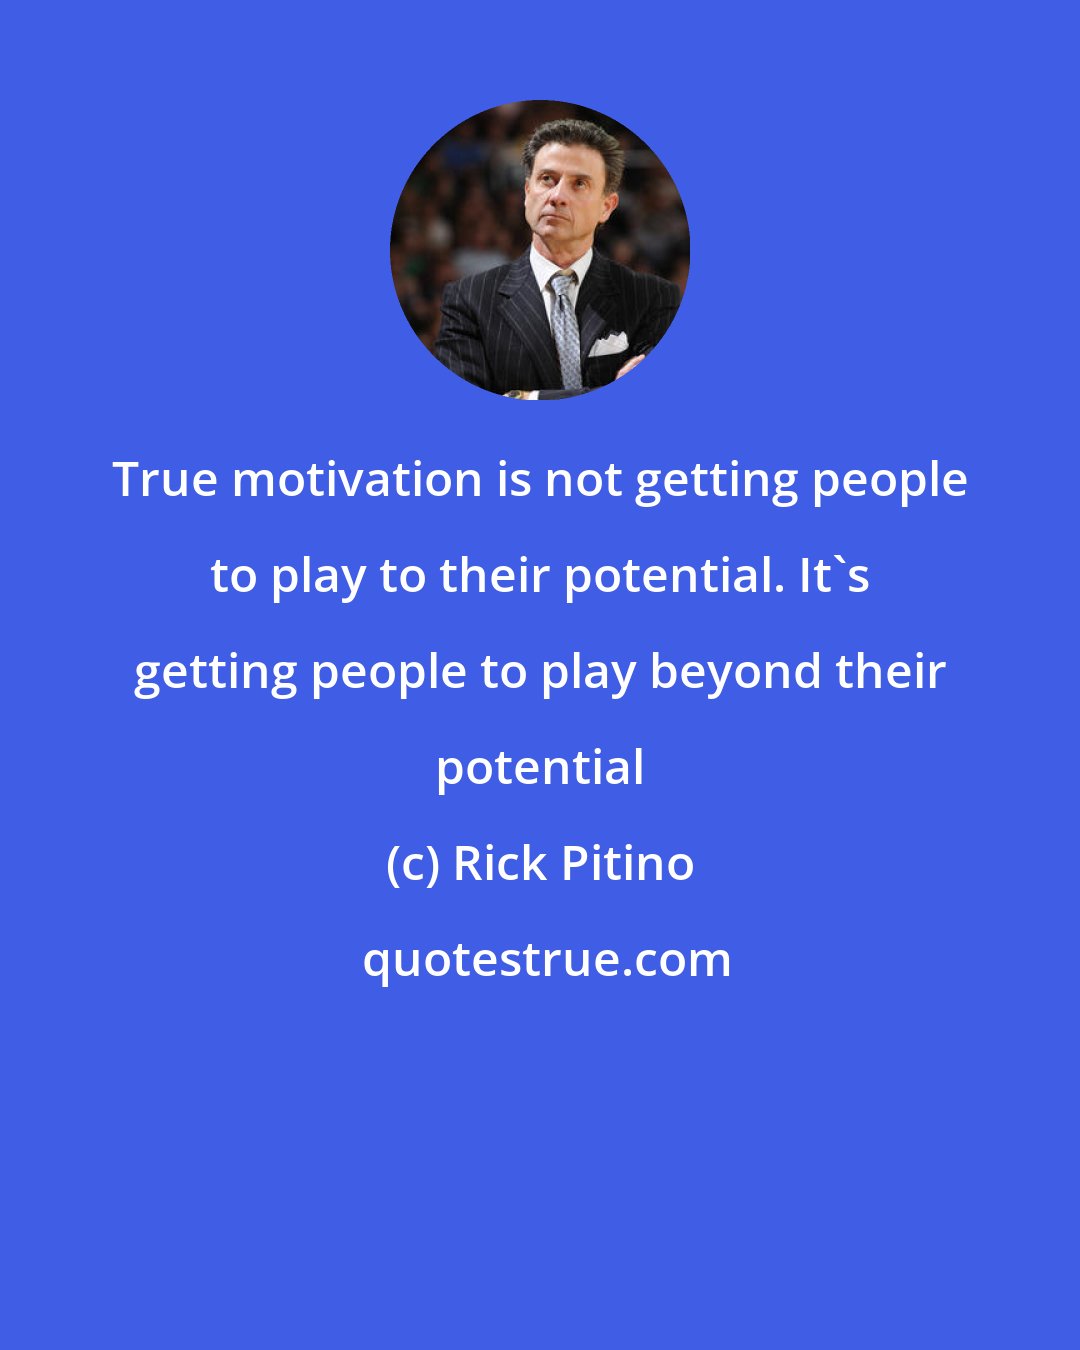 Rick Pitino: True motivation is not getting people to play to their potential. It's getting people to play beyond their potential